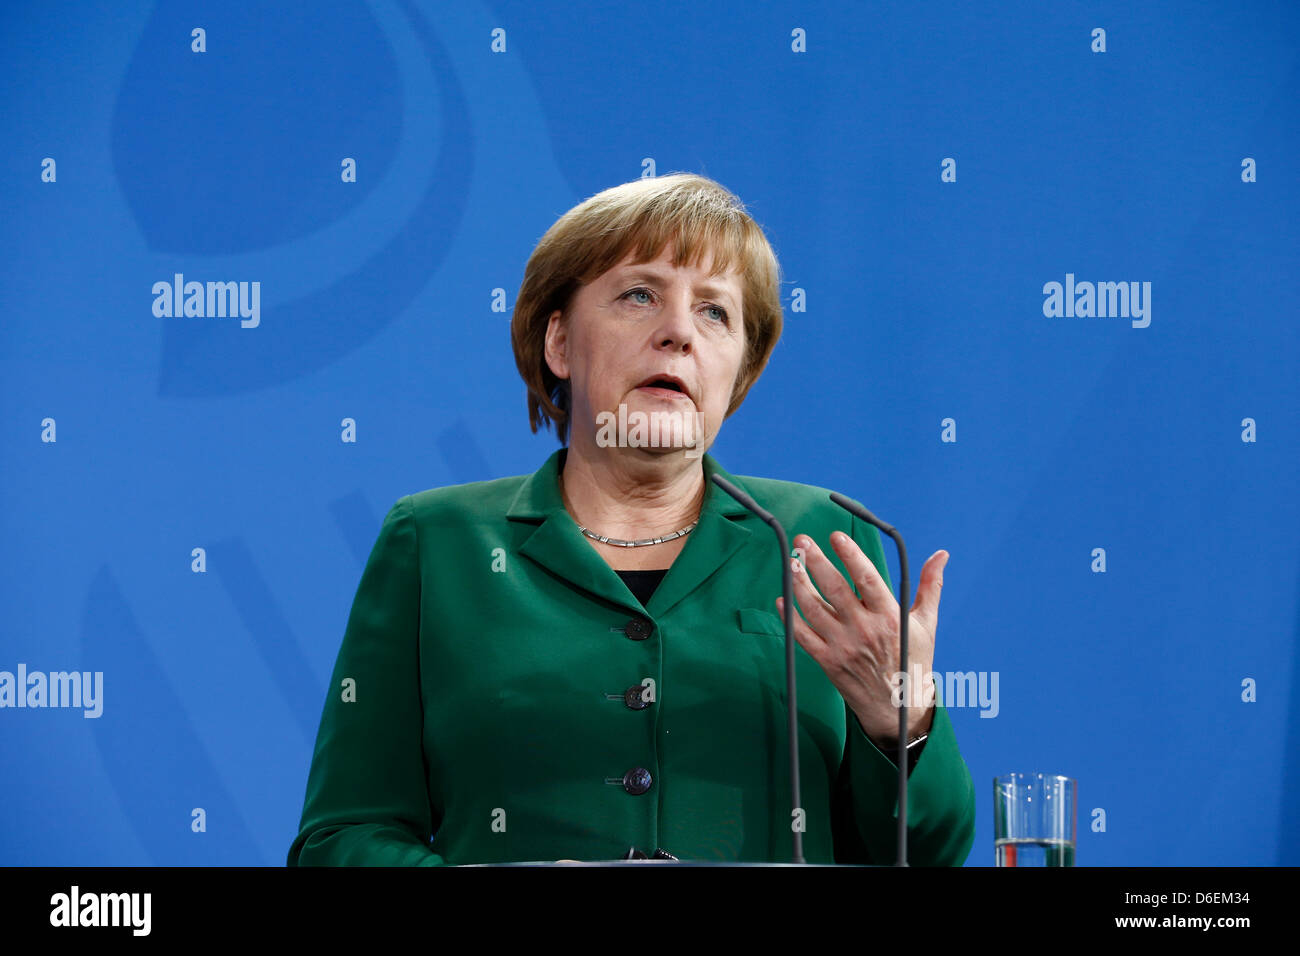 Germany, Berlin. 17th April, 2013. Prime Minister of Estonia, Andrus Ansip, is meeting Chancellor Angela Merkel to talk about the bilateral relations, the situation in the euro zone and the Eastern Partnership, as well as international issues at the Chancellery in Berlin. On picture: Angela Merkel (CDU), German Chancellor. Stock Photo